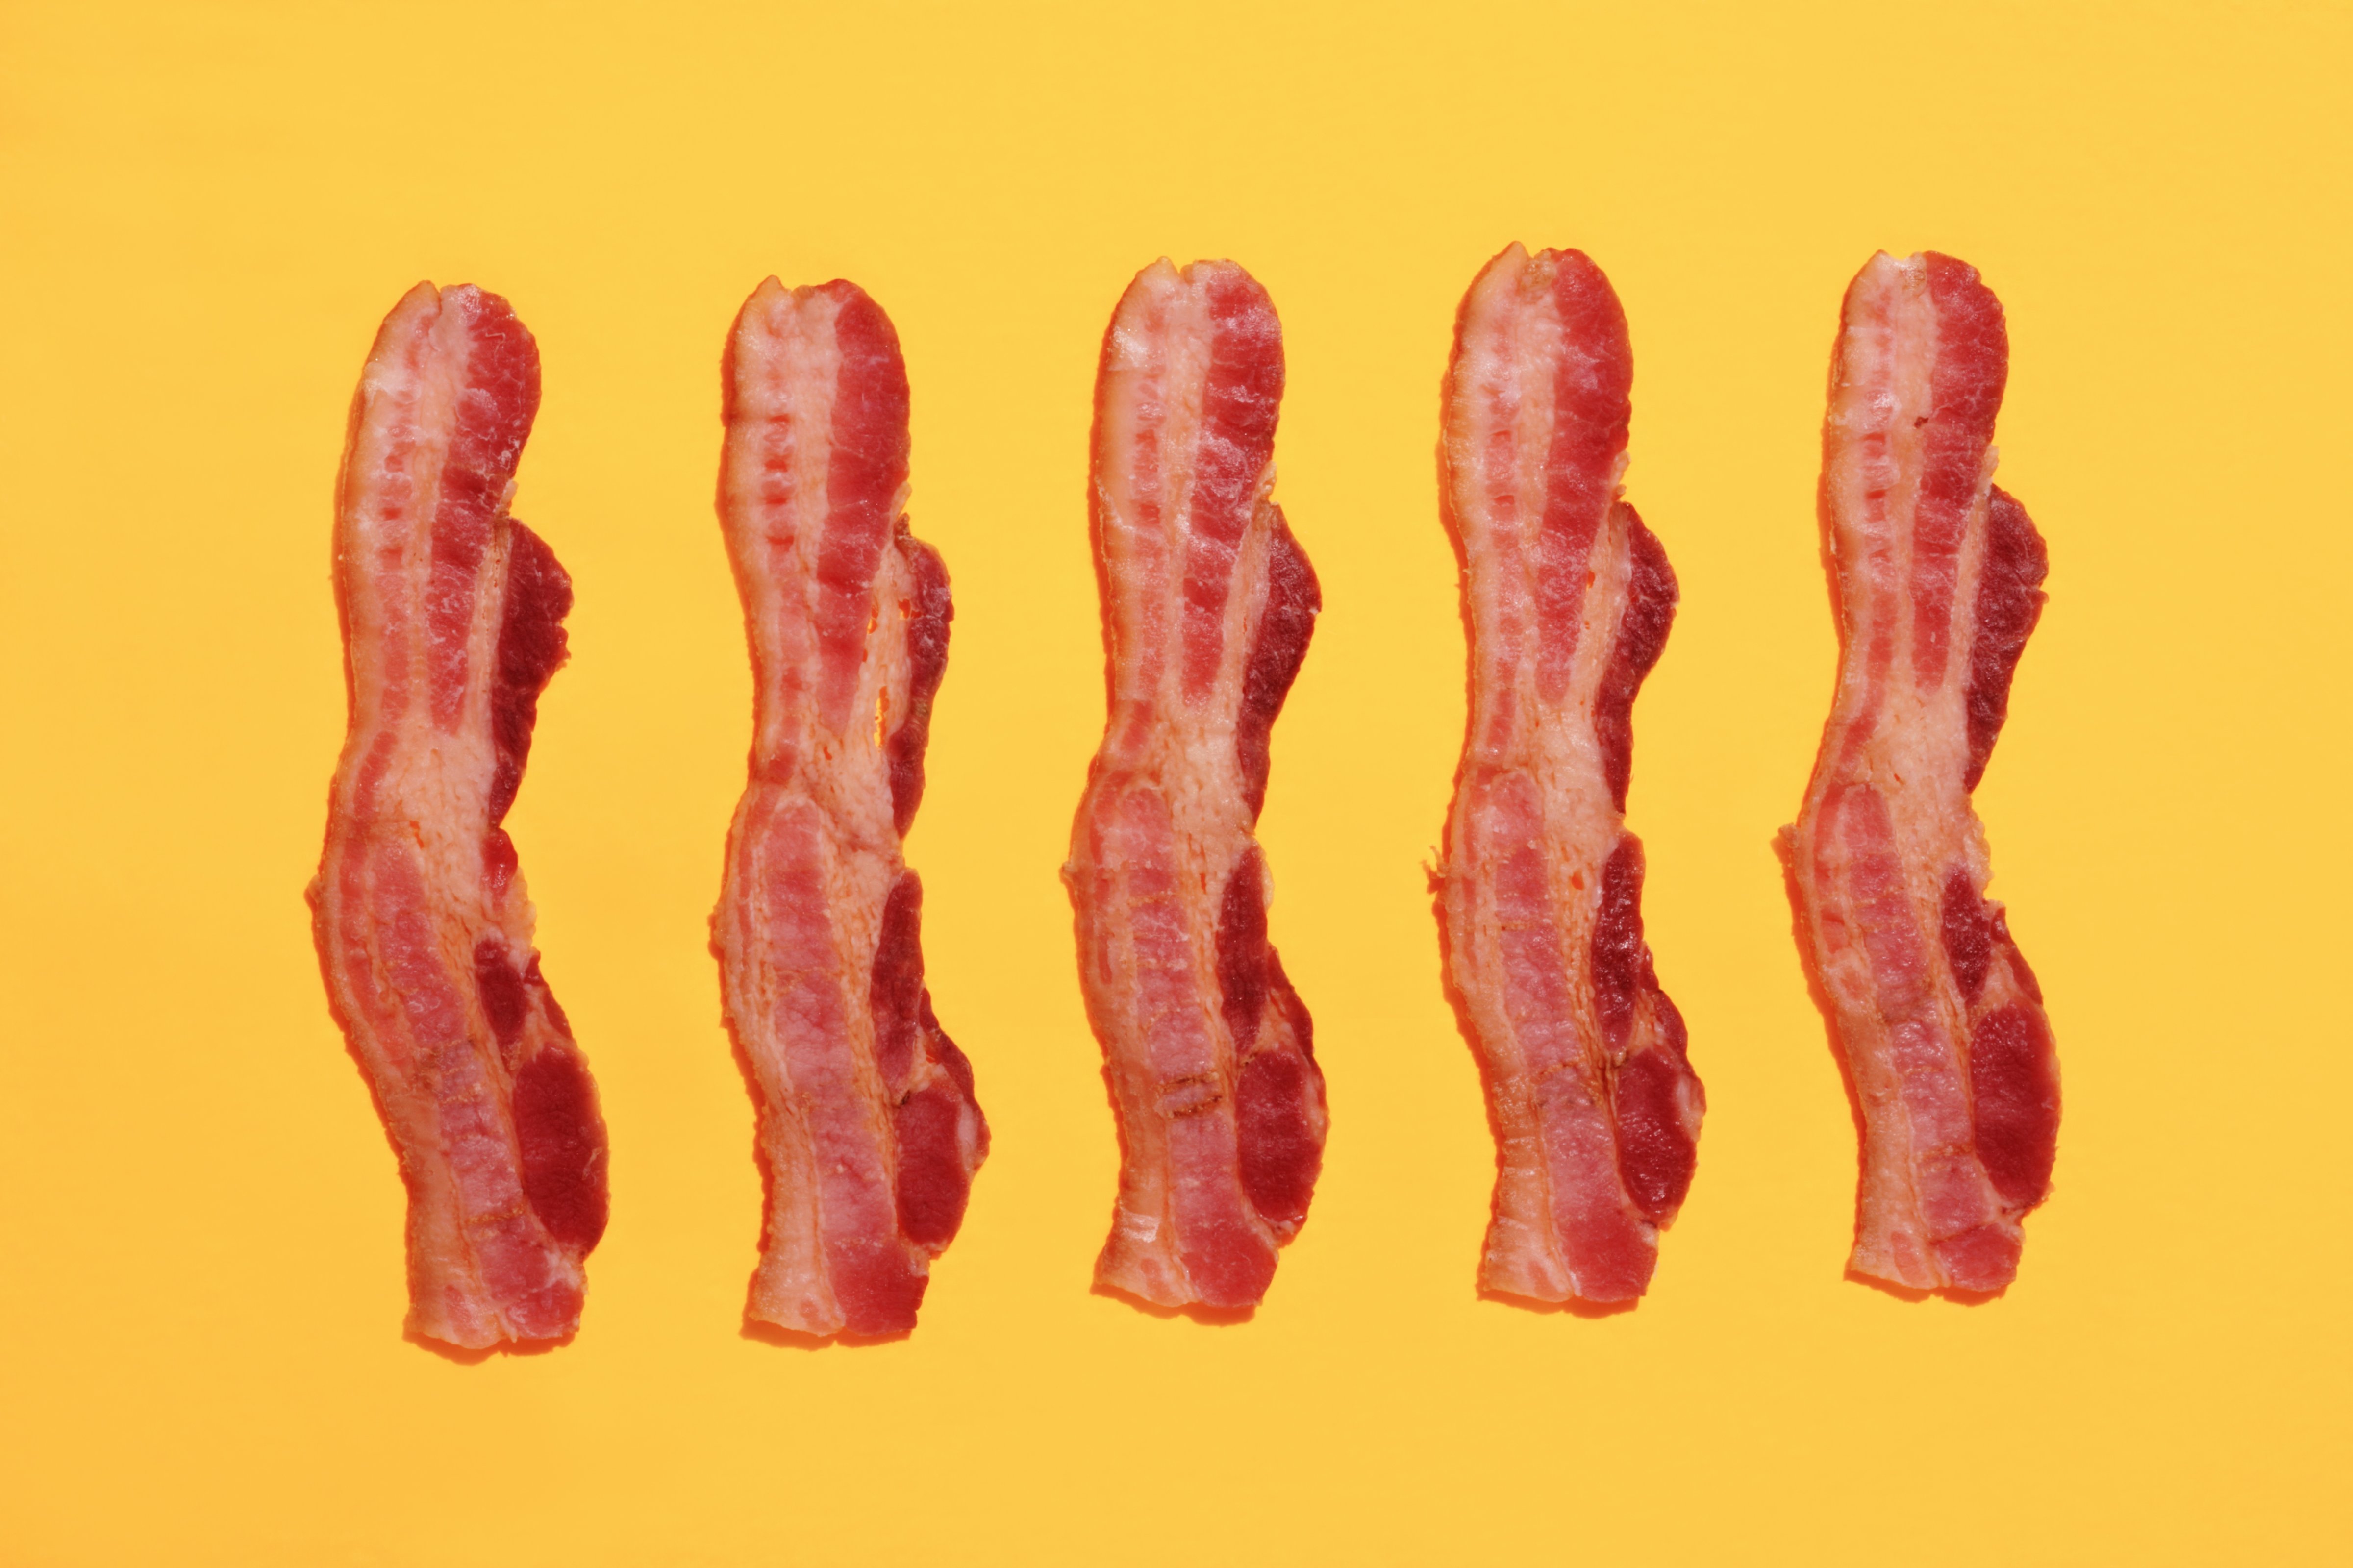 Strips of bacon (Paul Taylor&mdash;Getty Images)